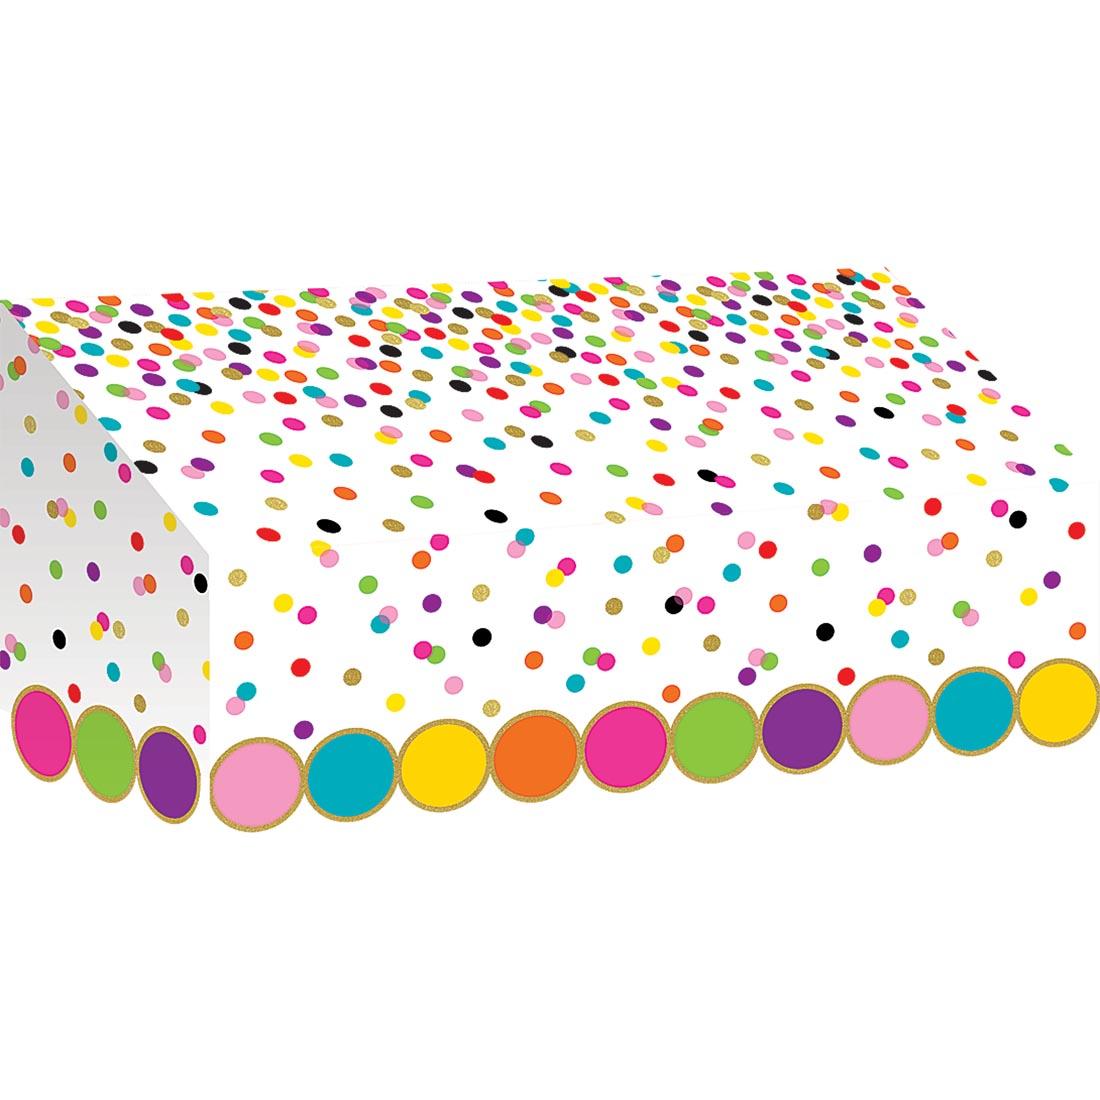 Awning from the Confetti collection by Teacher Created Resources